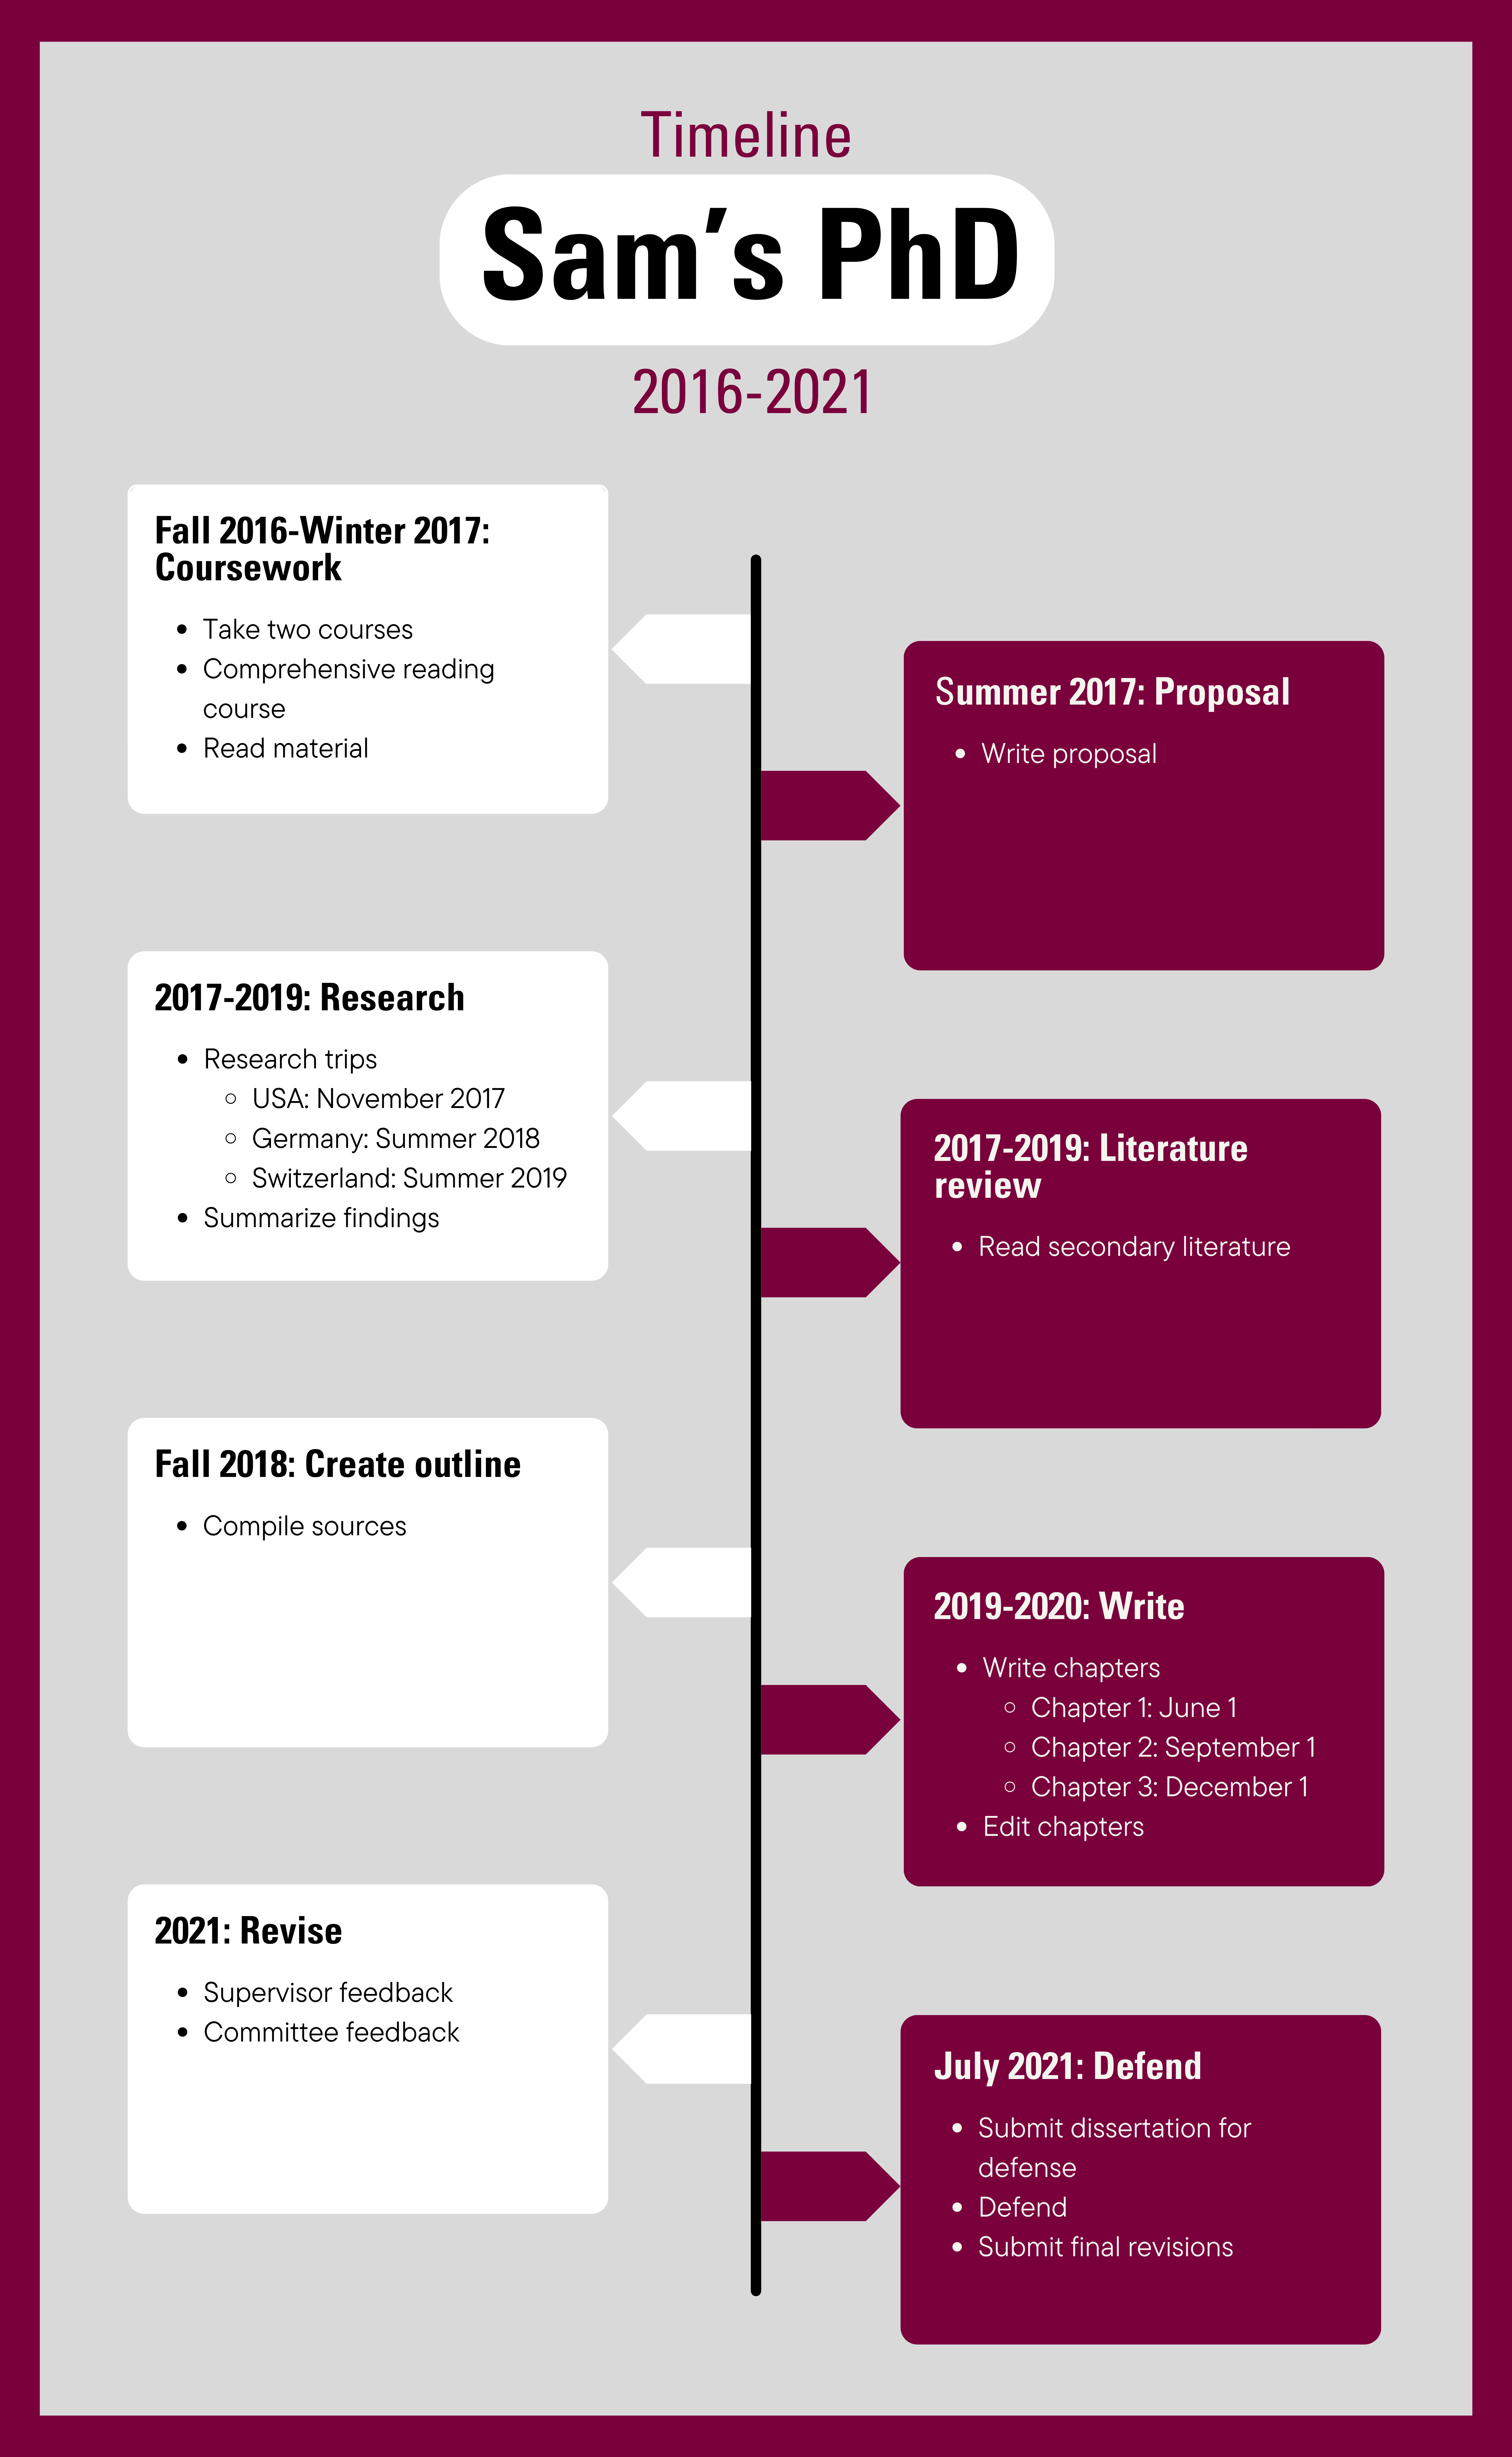 Sam’s PhD Timeline from 2016 to 2021 with text description below.